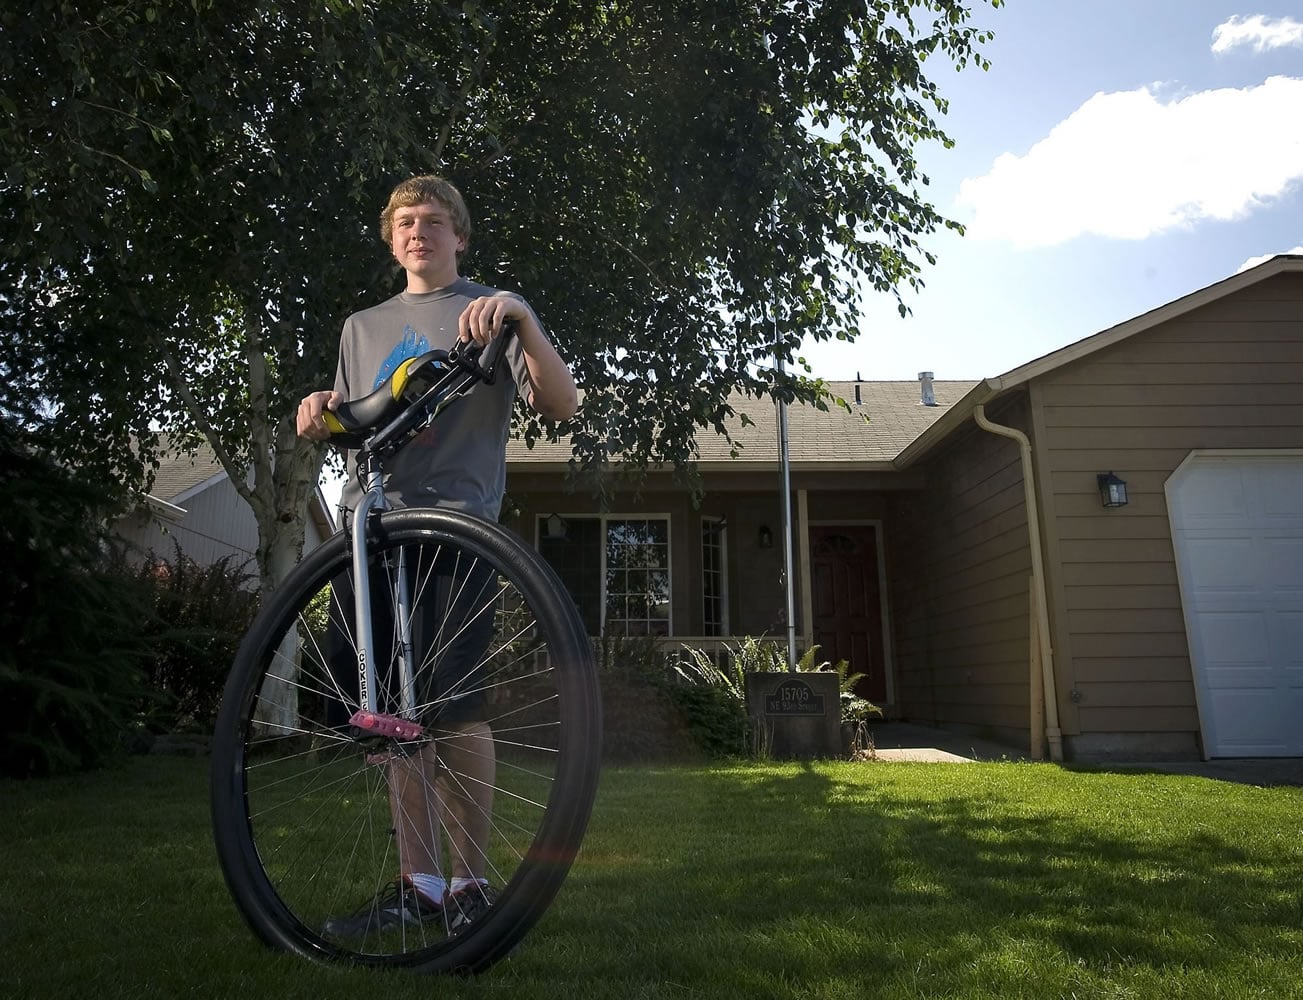 Vancouver resident Michael Smith, 16 was diagnosed with type 1 diabetes two years ago He will ride 27 miles on his unicycle for an American Diabetes Association fundraiser Saturday.